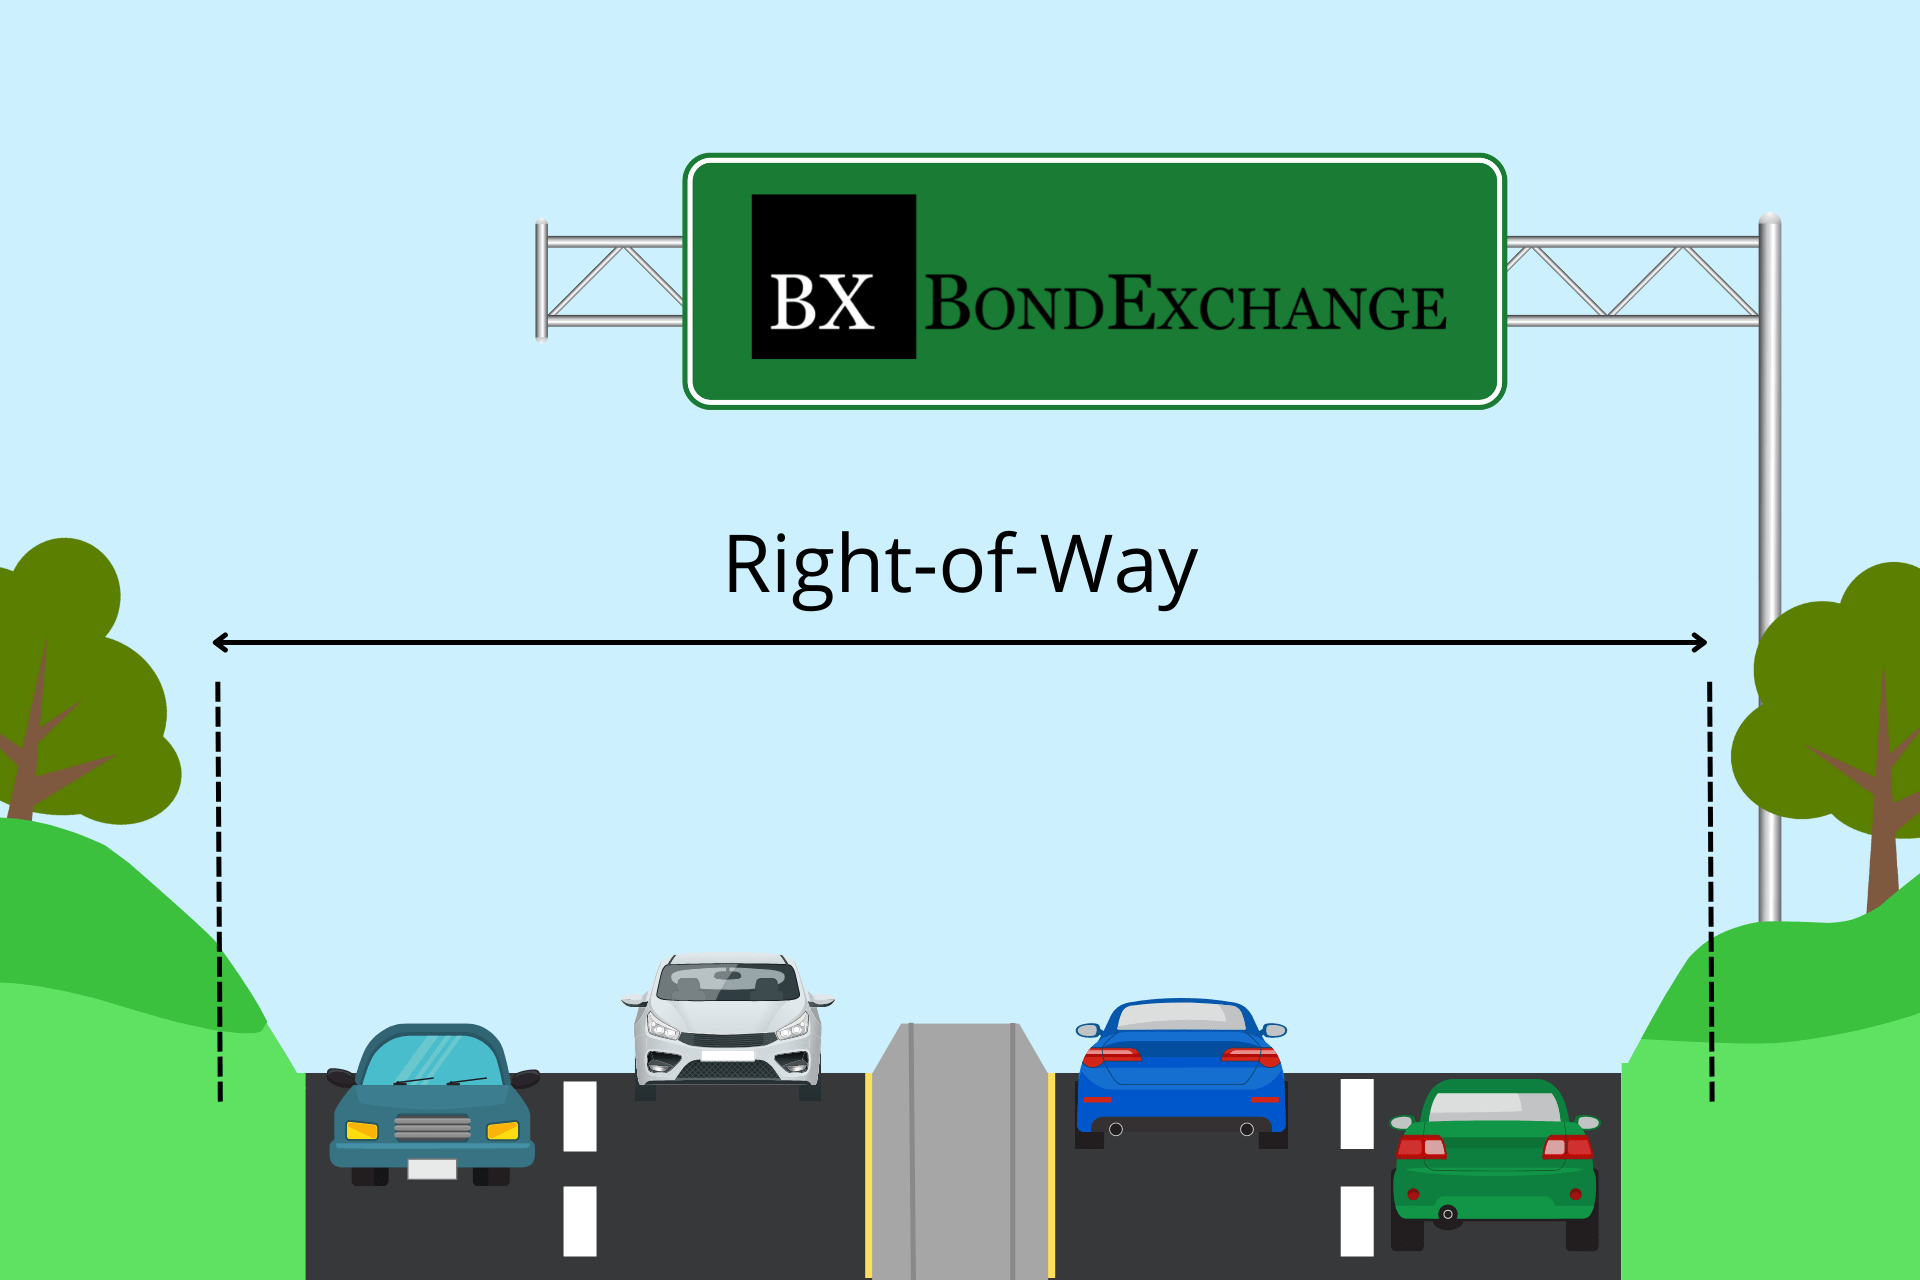 Highway Right-of-Way